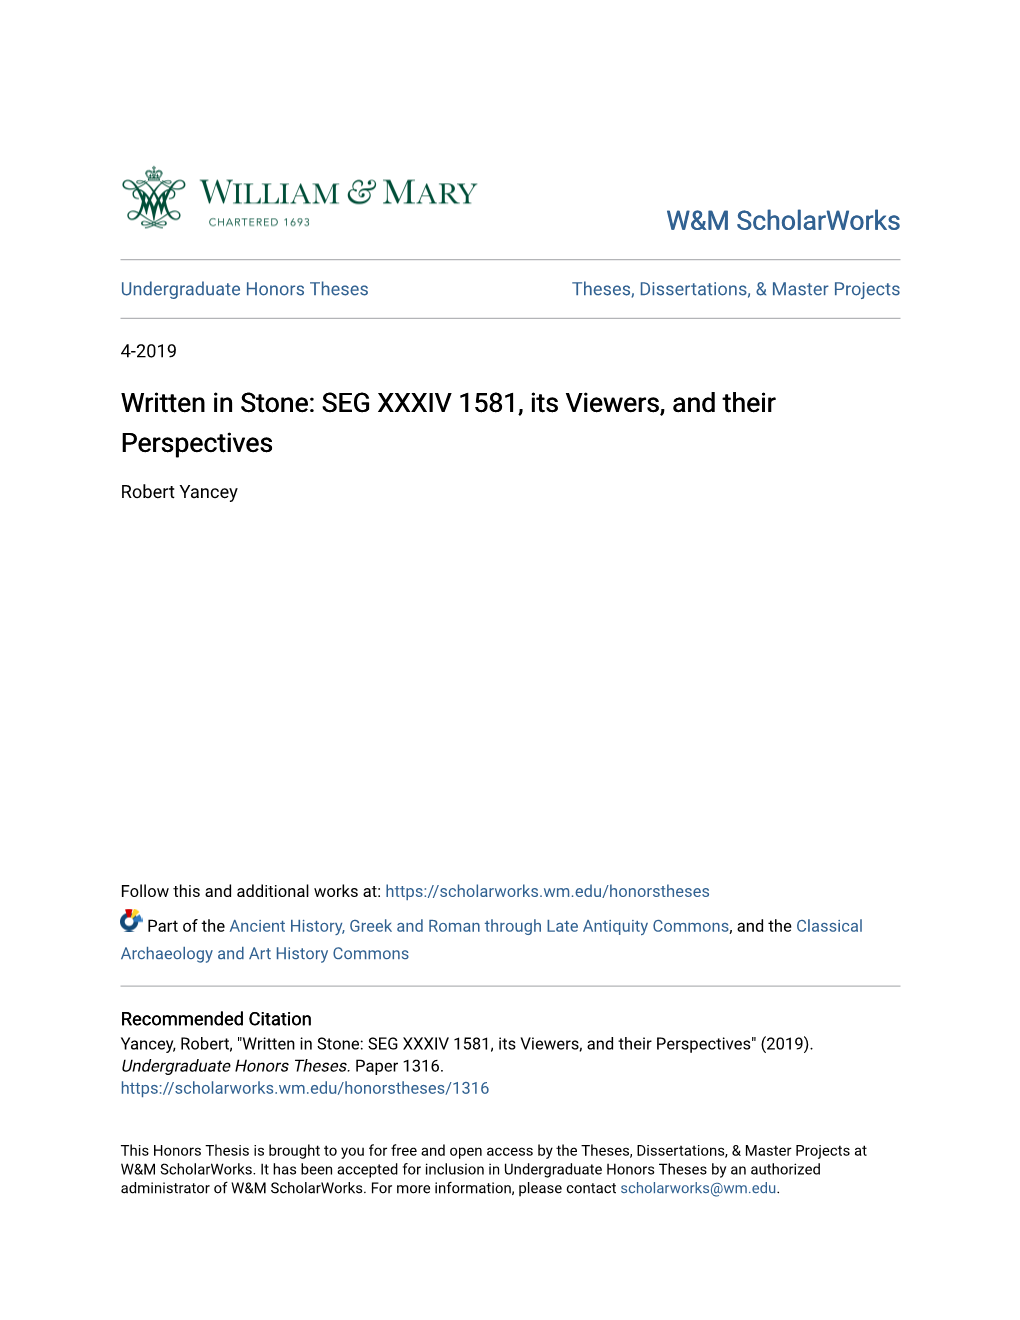 SEG XXXIV 1581, Its Viewers, and Their Perspectives